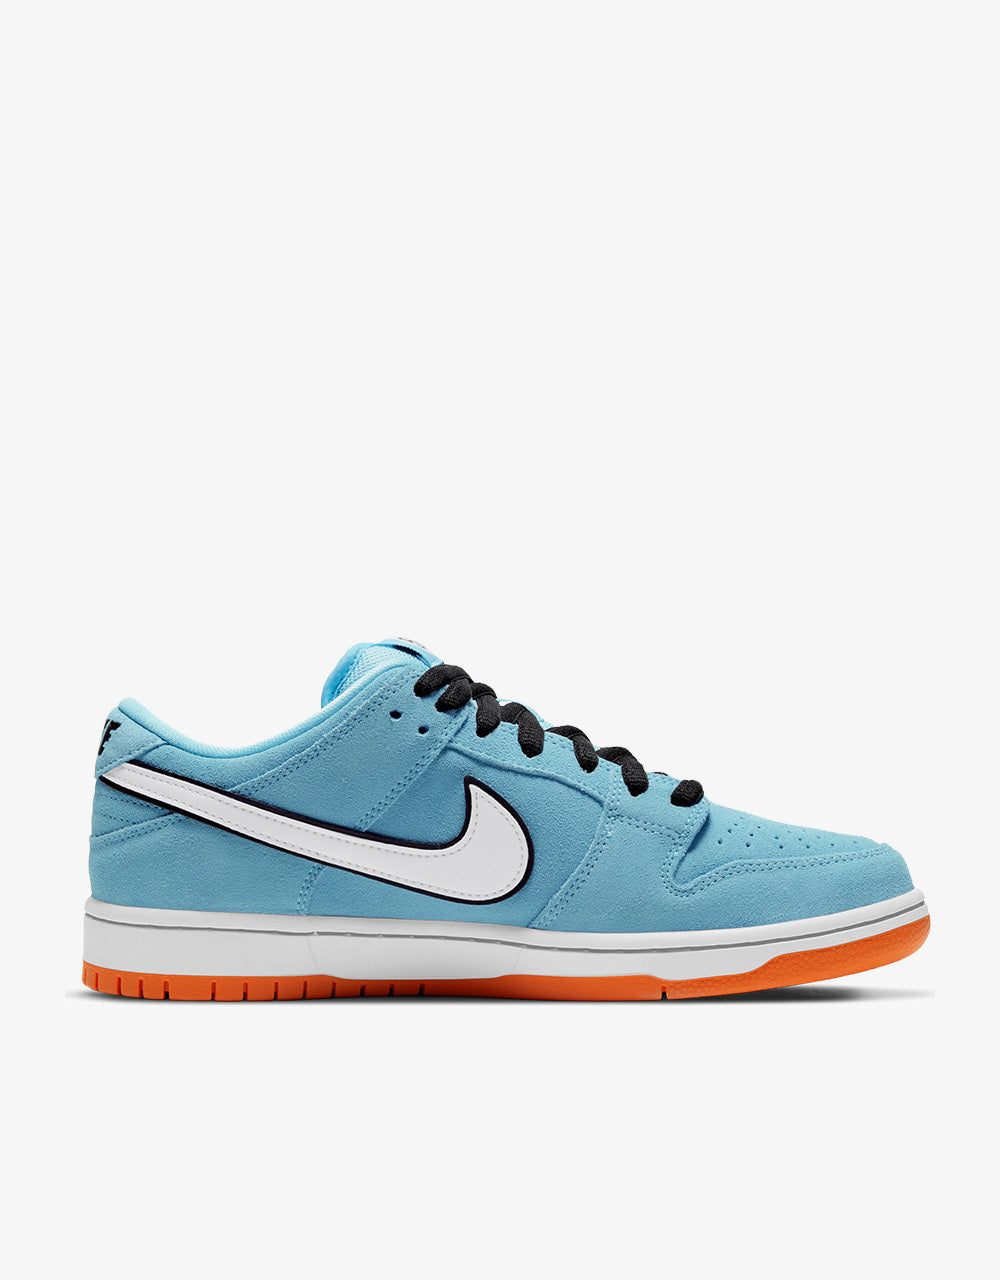 Nike SB 'Gulf' Dunk Low Pro – Route One Launches